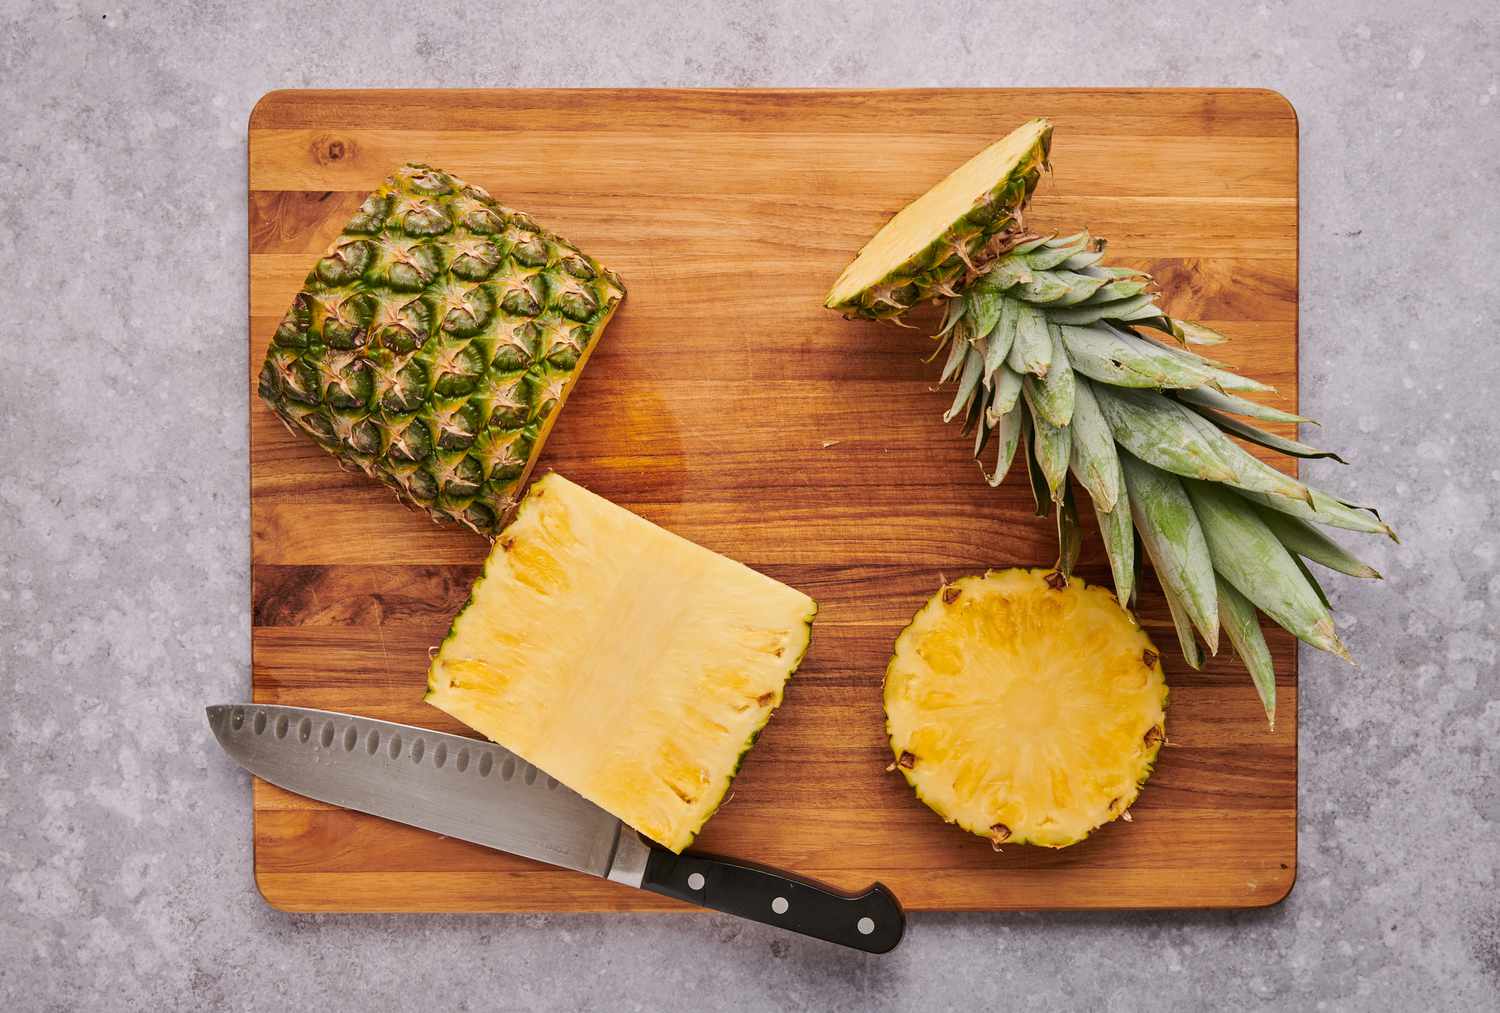 A cutting board with a pineapple cut in half, a bottom slice, and top with fronds